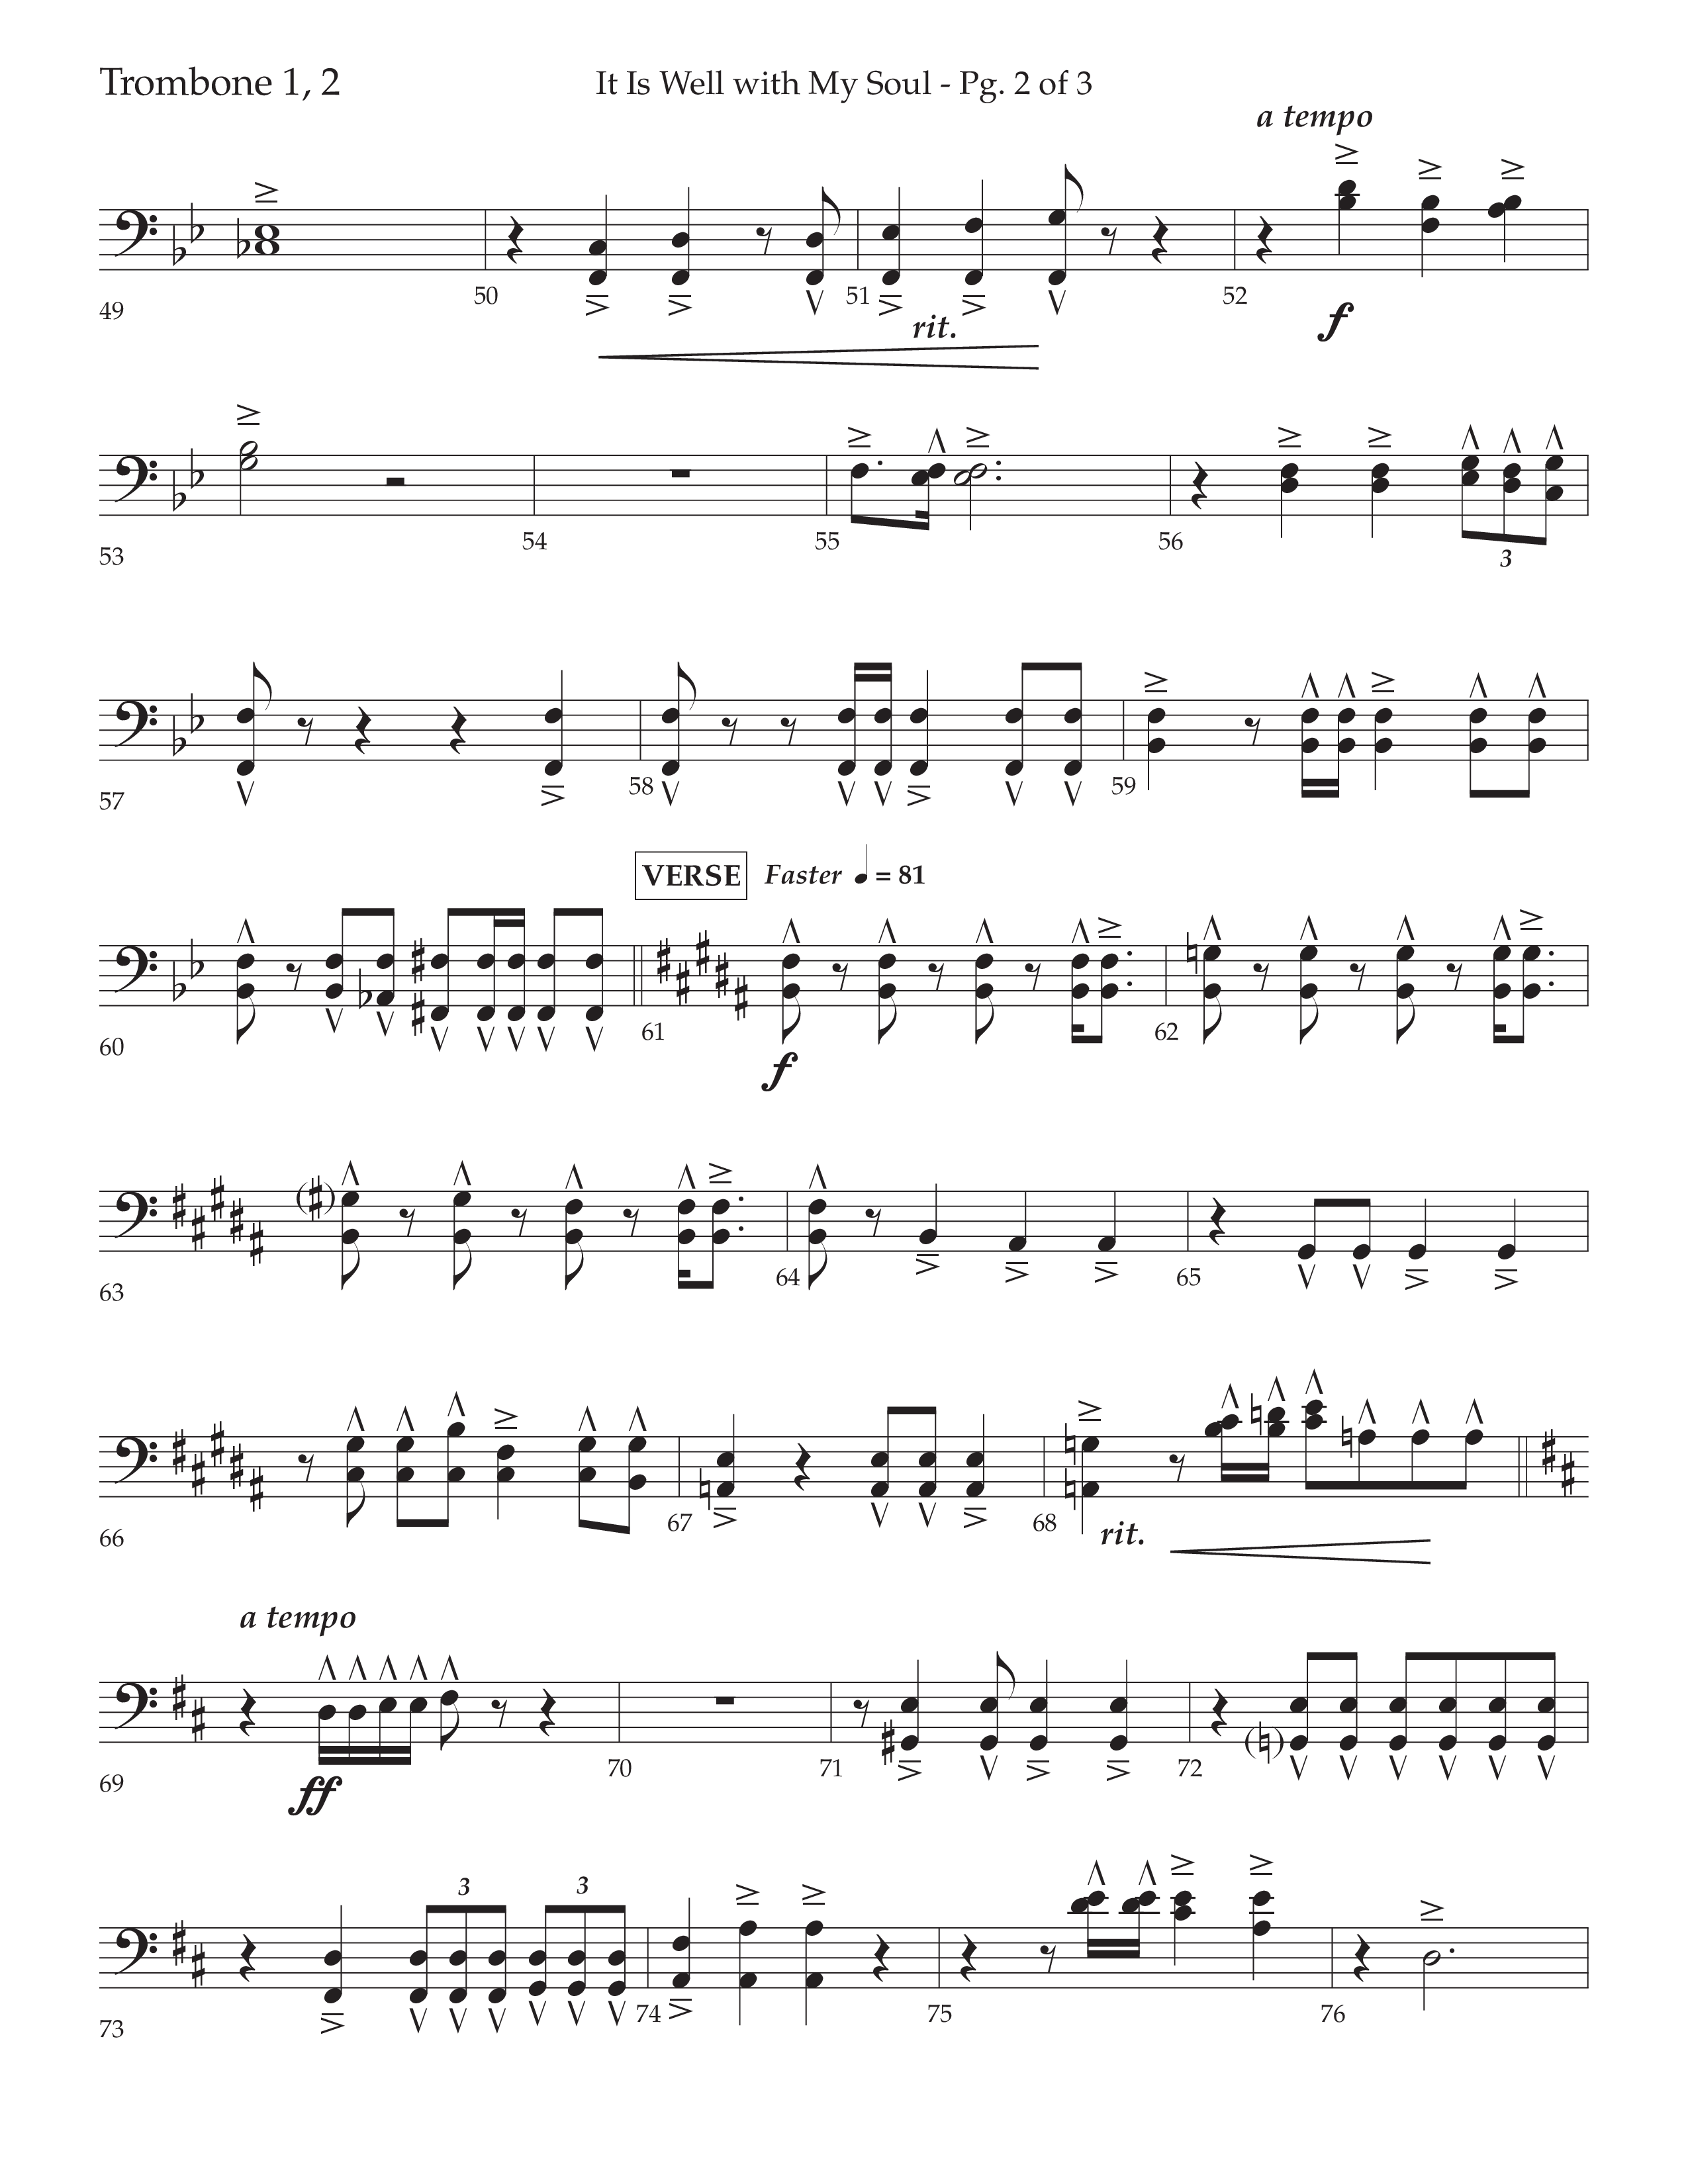 It Is Well With My Soul (Choral Anthem SATB) Trombone 1/2 (Lifeway Choral / Arr. John Bolin / Orch. David Clydesdale)